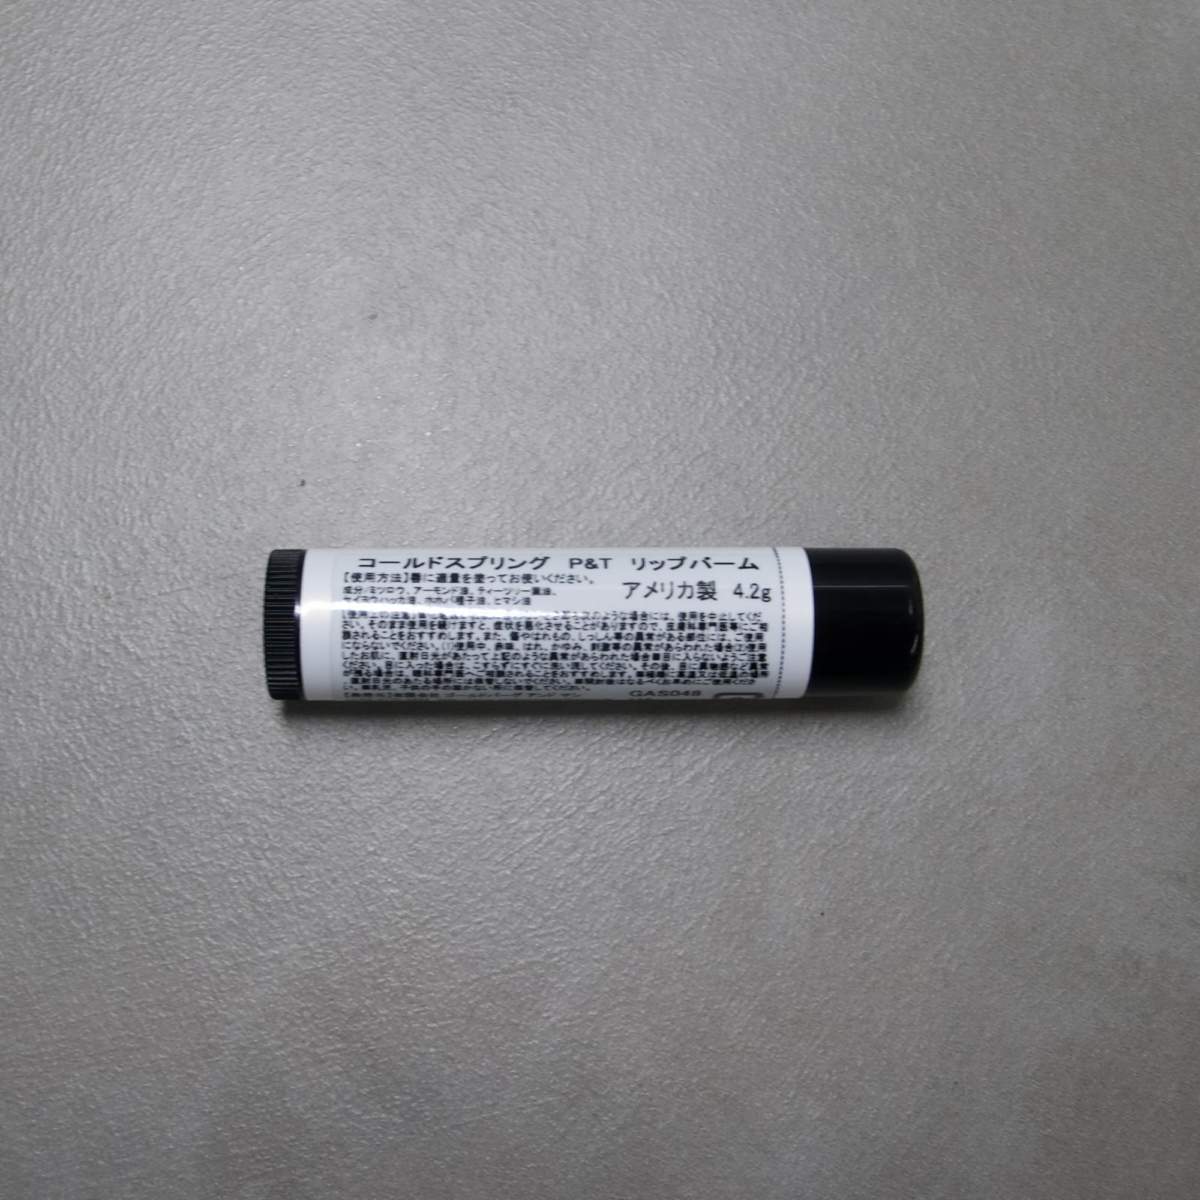 OthersCOLD SPRING APOTHECARY Peppermint & Tea Tree Lip Balm